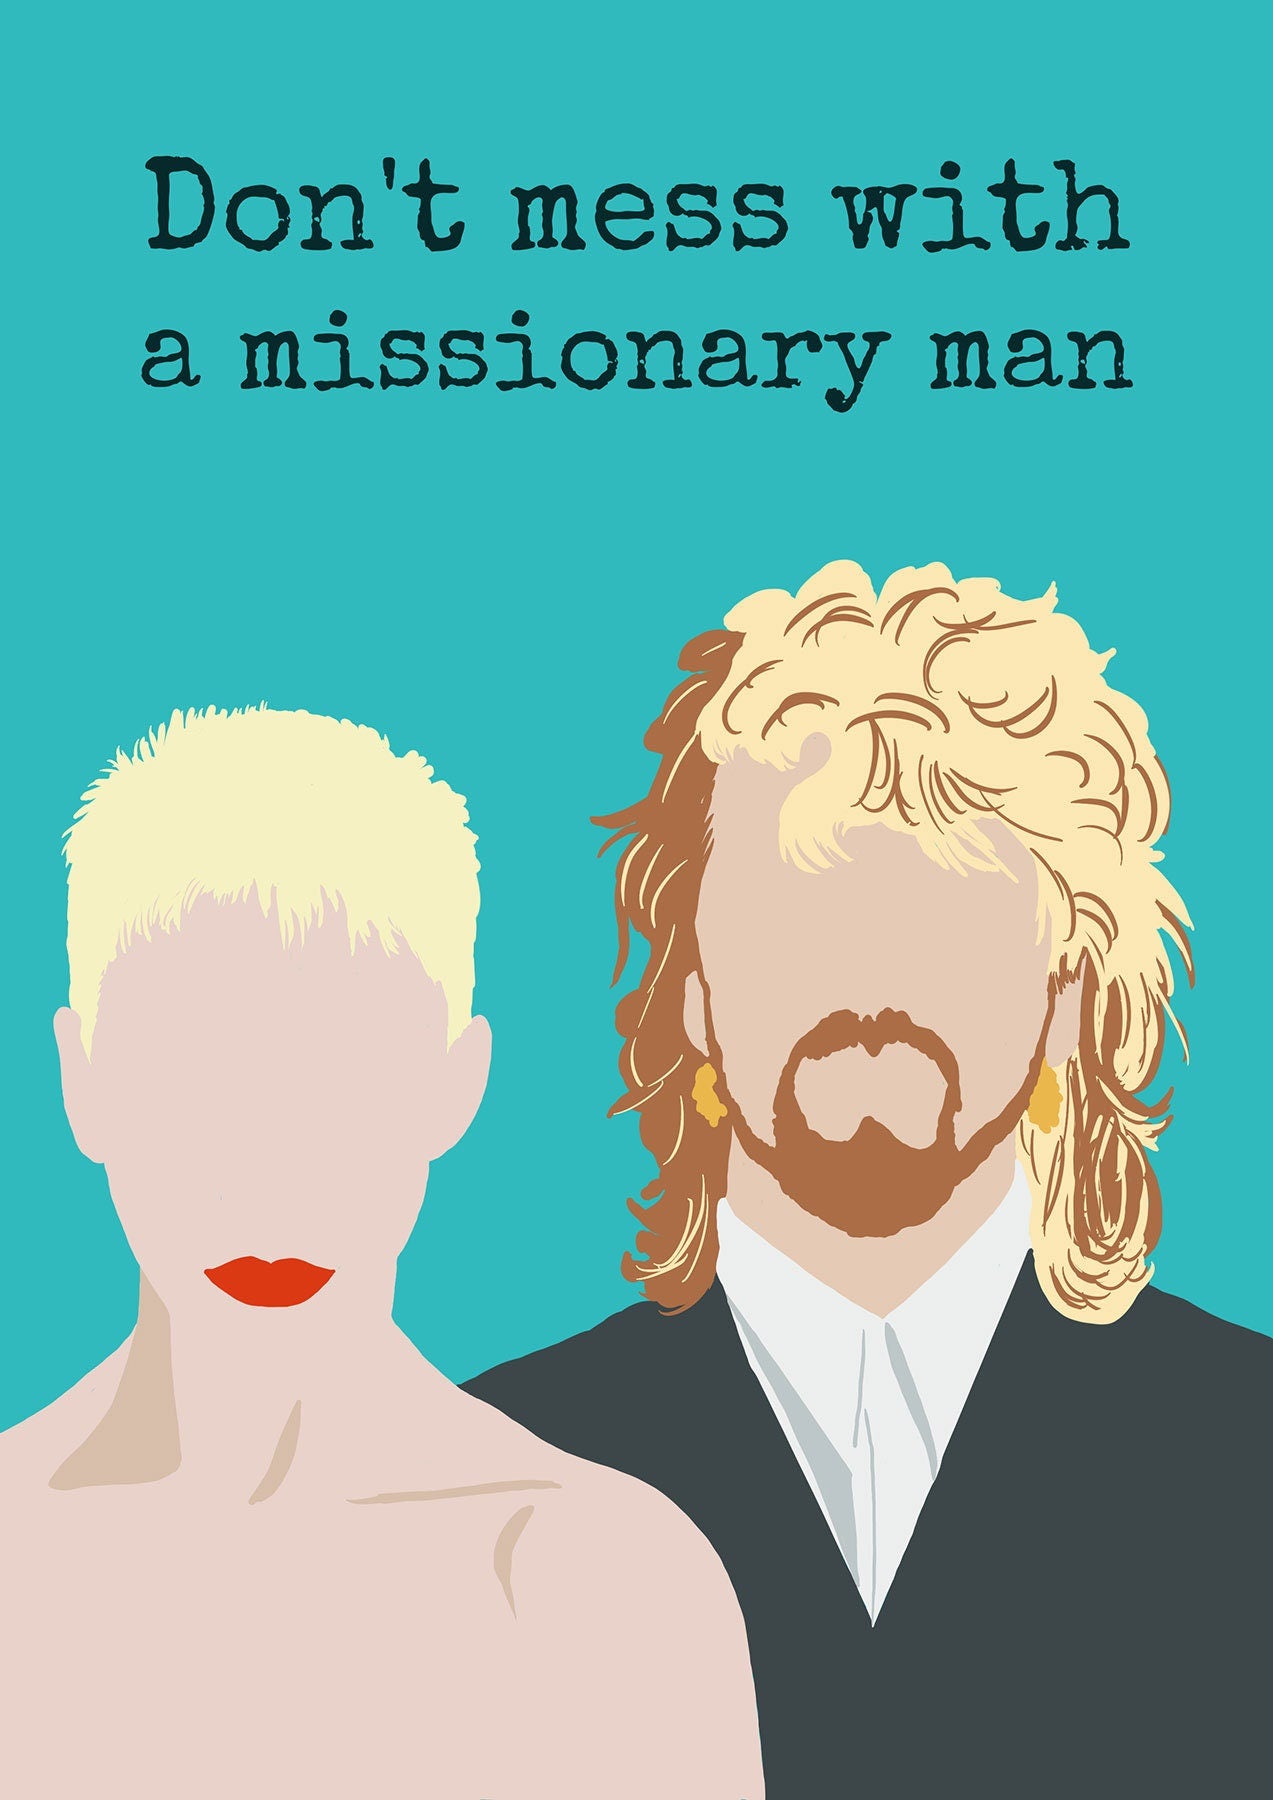 Eurythmics inspired postcards, set of 4, new wave card, 80s music, gift for new wave music fan, music postcard, Missionary Man, Annie Lennox